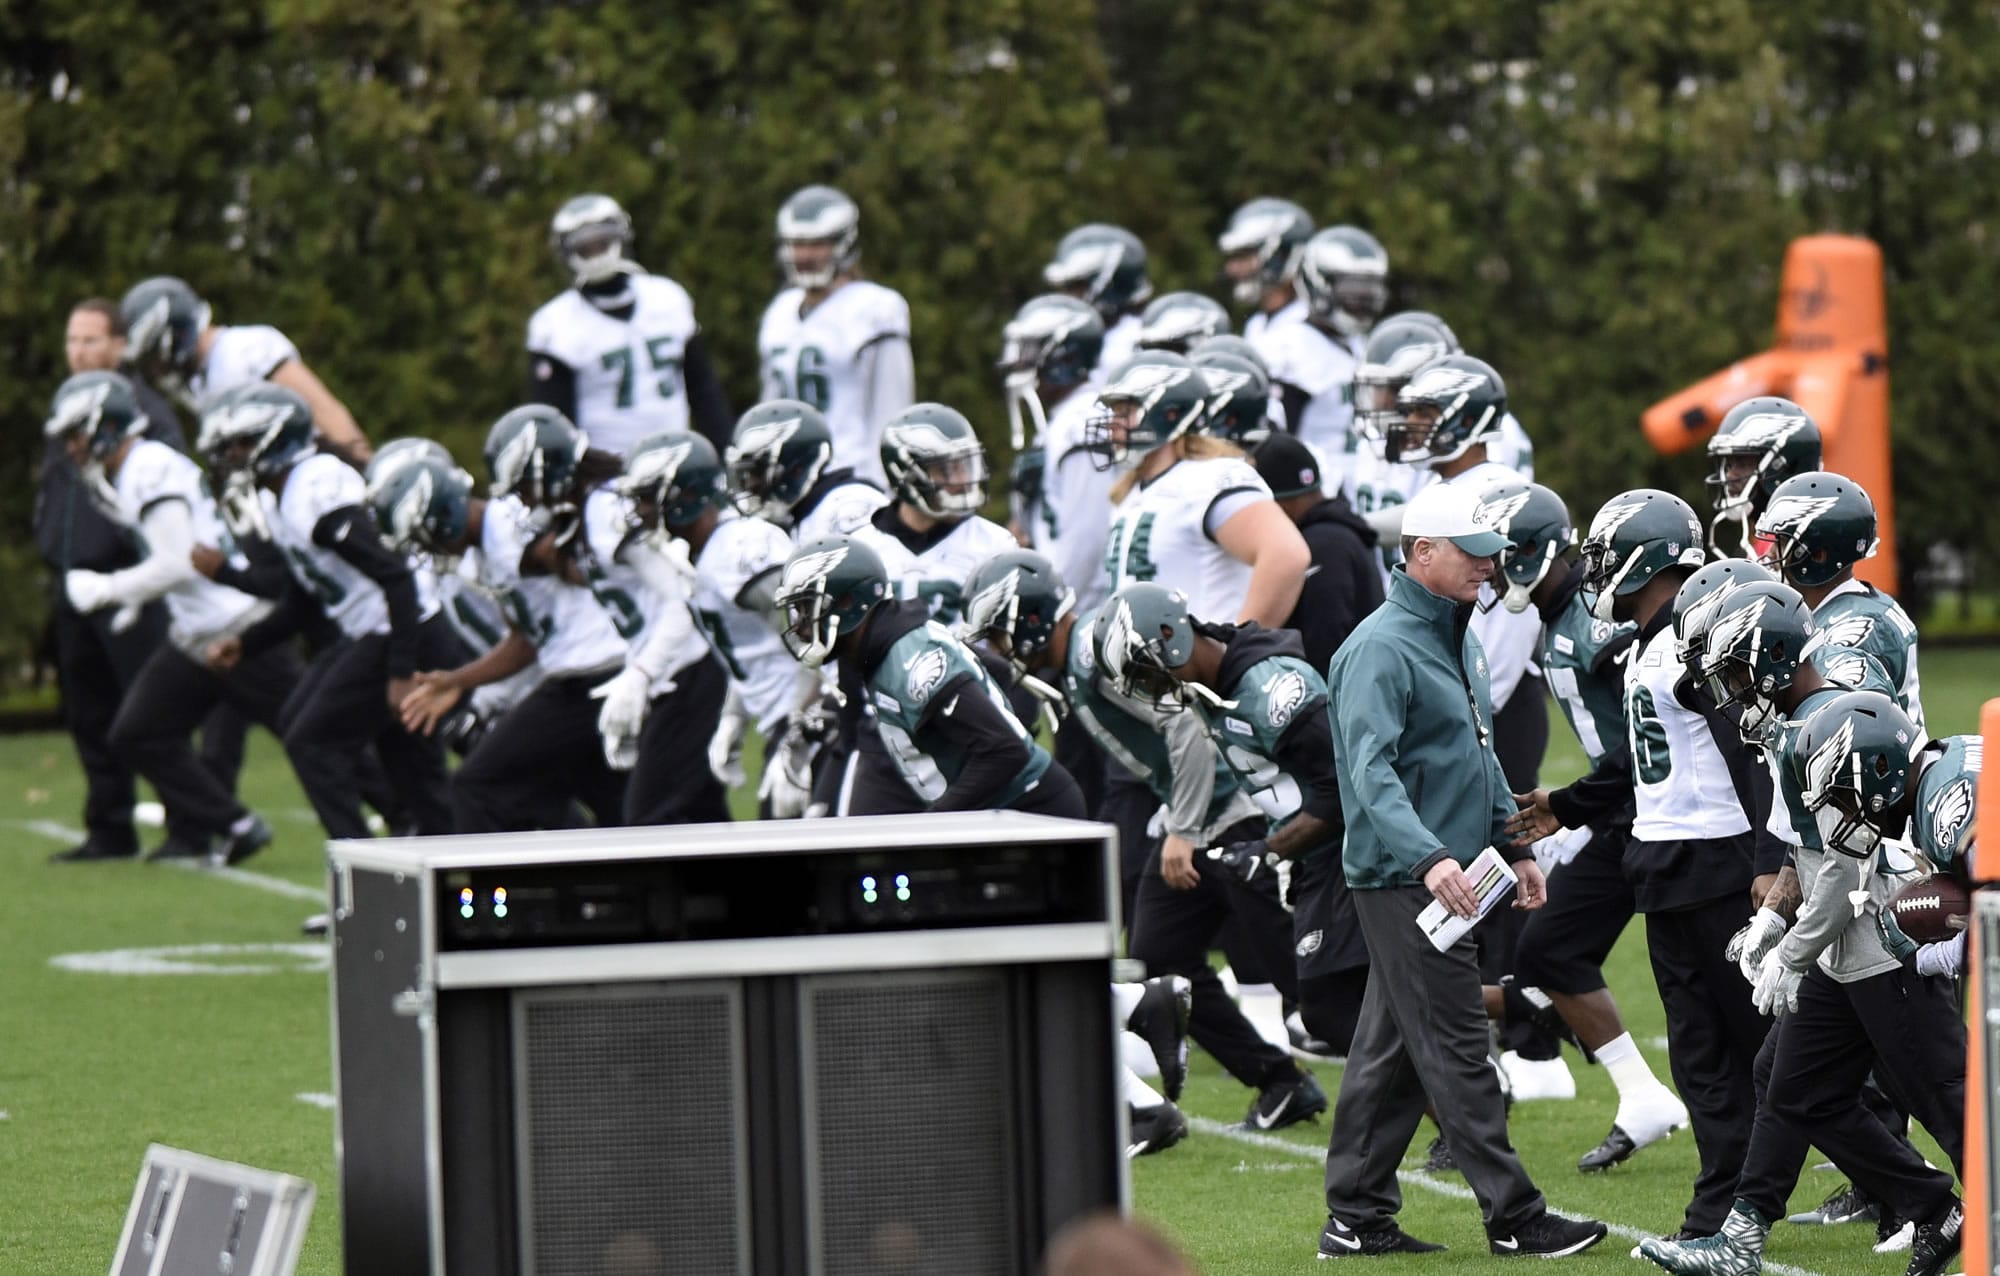 Philadelphia Eagles interim head coach Pat Shurmur, front right, watches during NFL football practice Wednesday in Philadelphia. The Eagles fired head coach Chip Kelly with one game left in his third season.